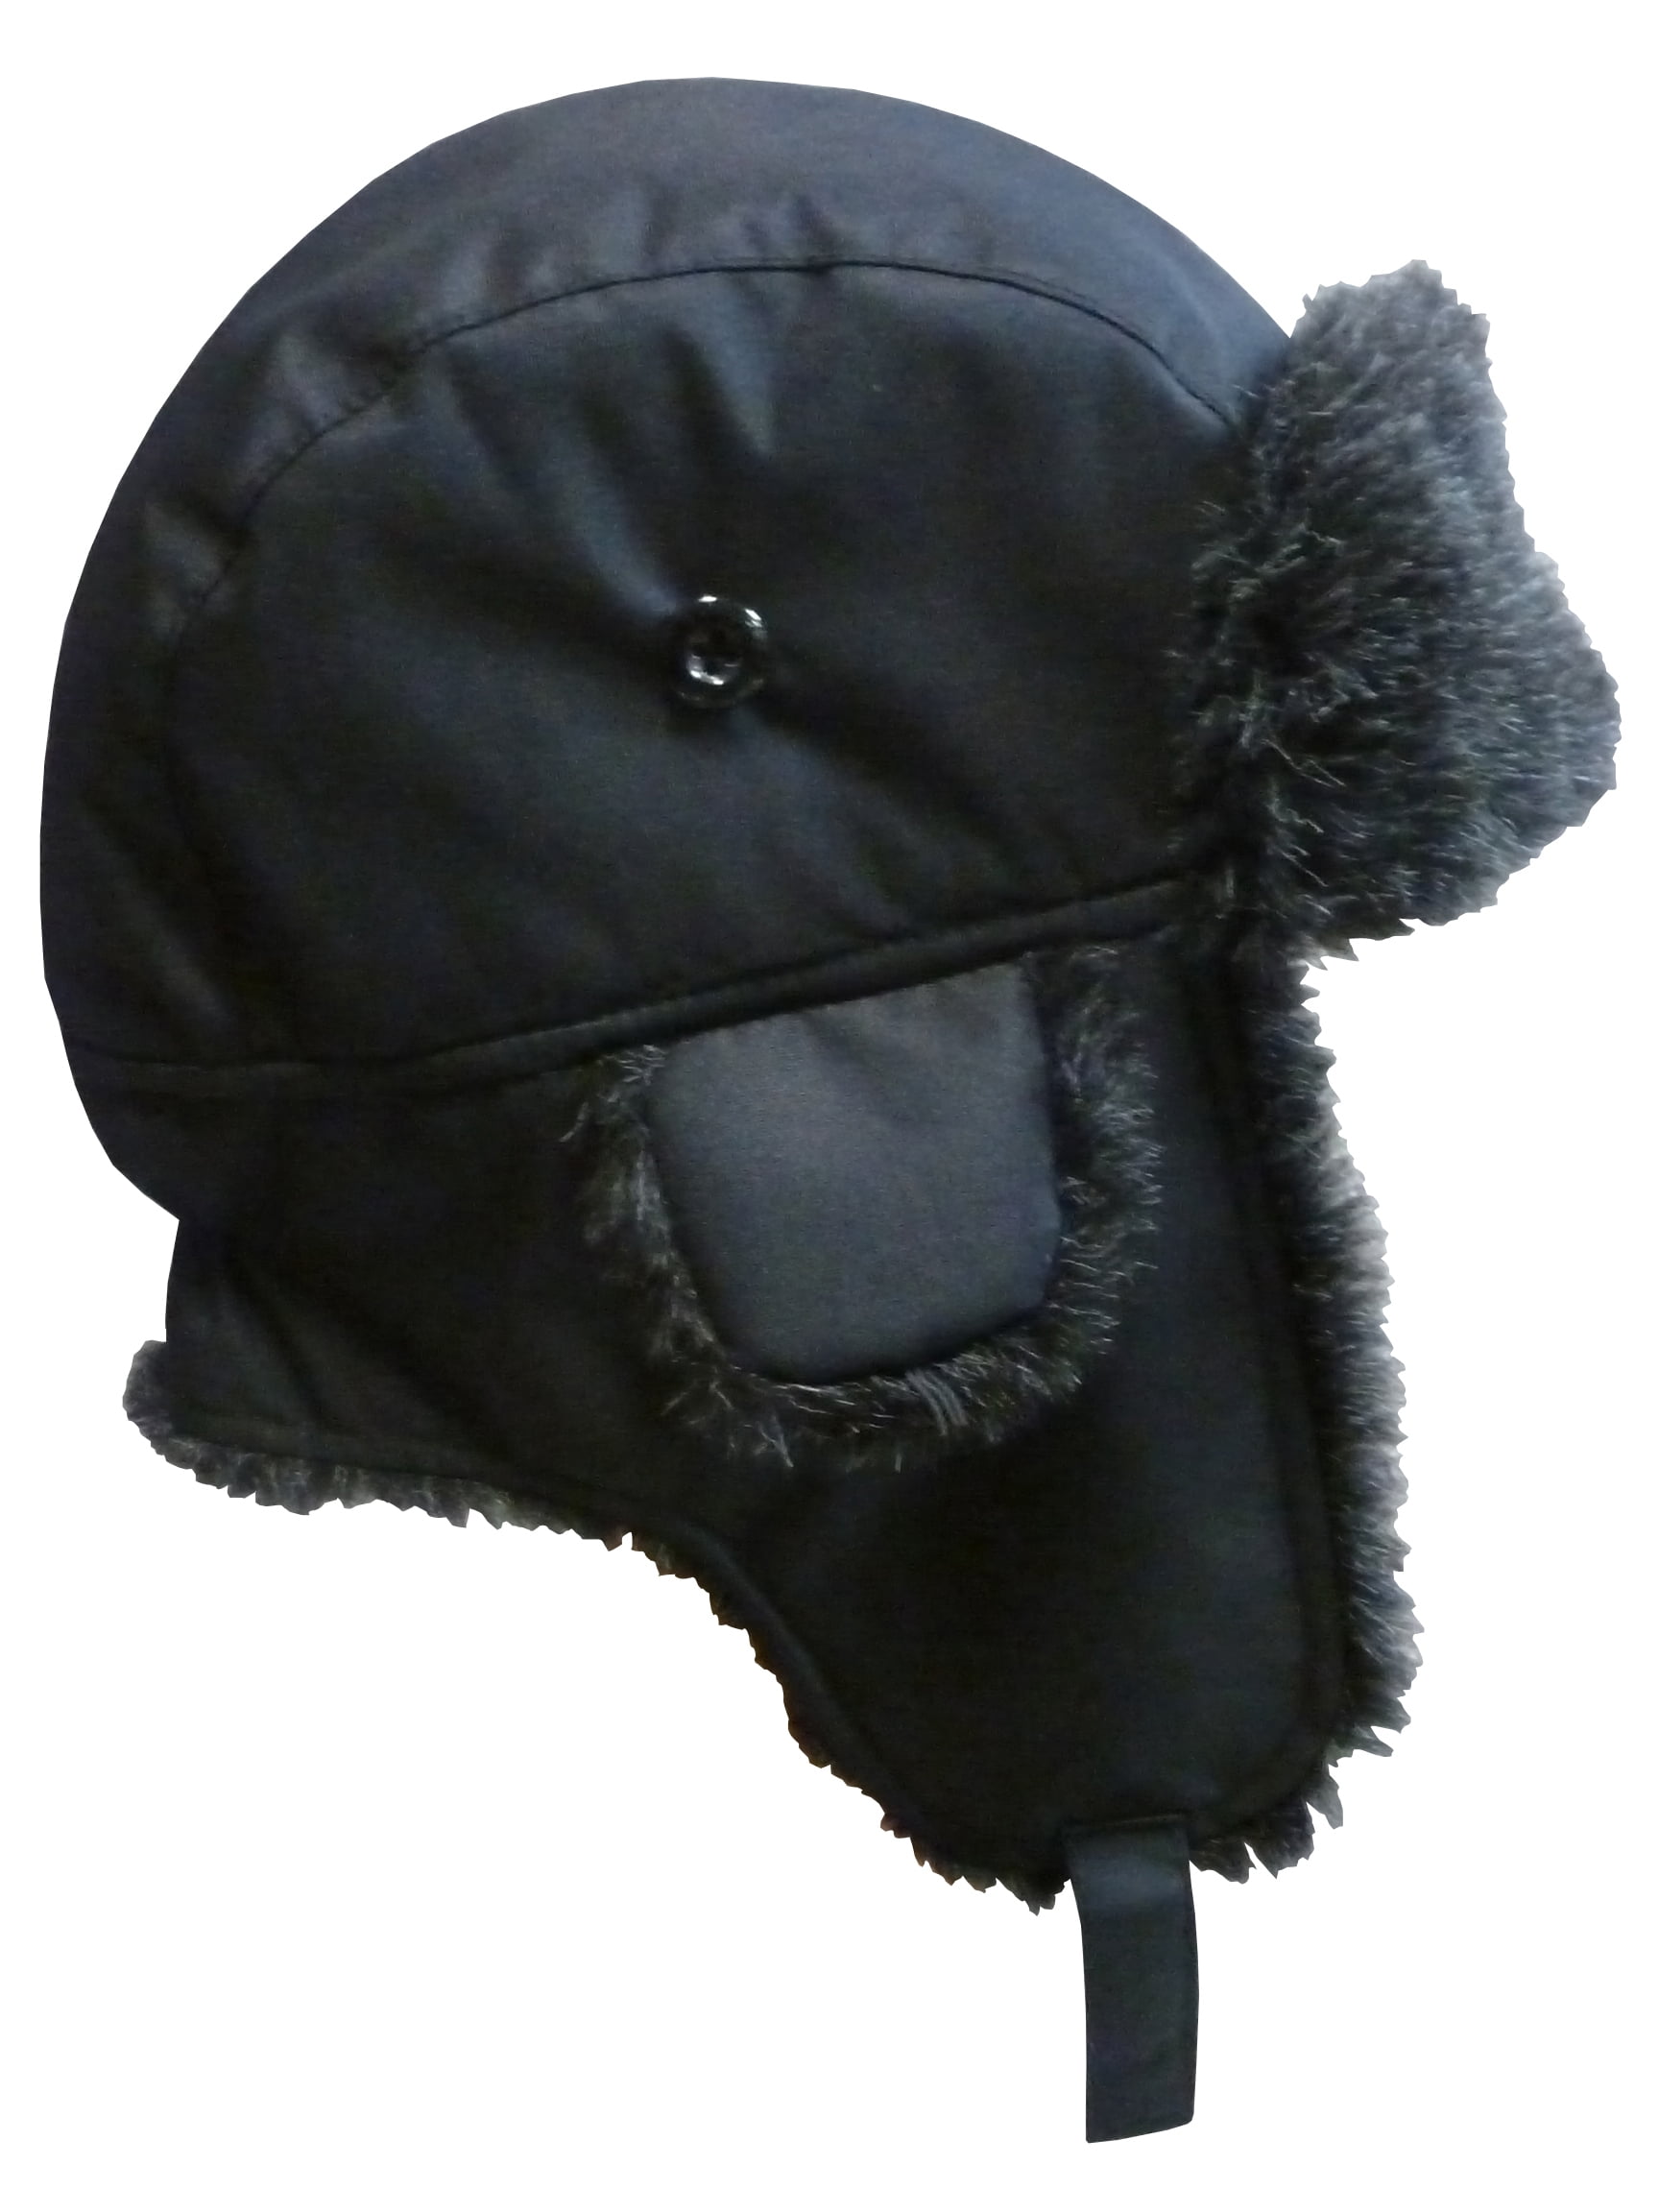 Winter Hats Ski for Kids-Trapper Hat with Earflap Face Mask fit 4 to 10 Years